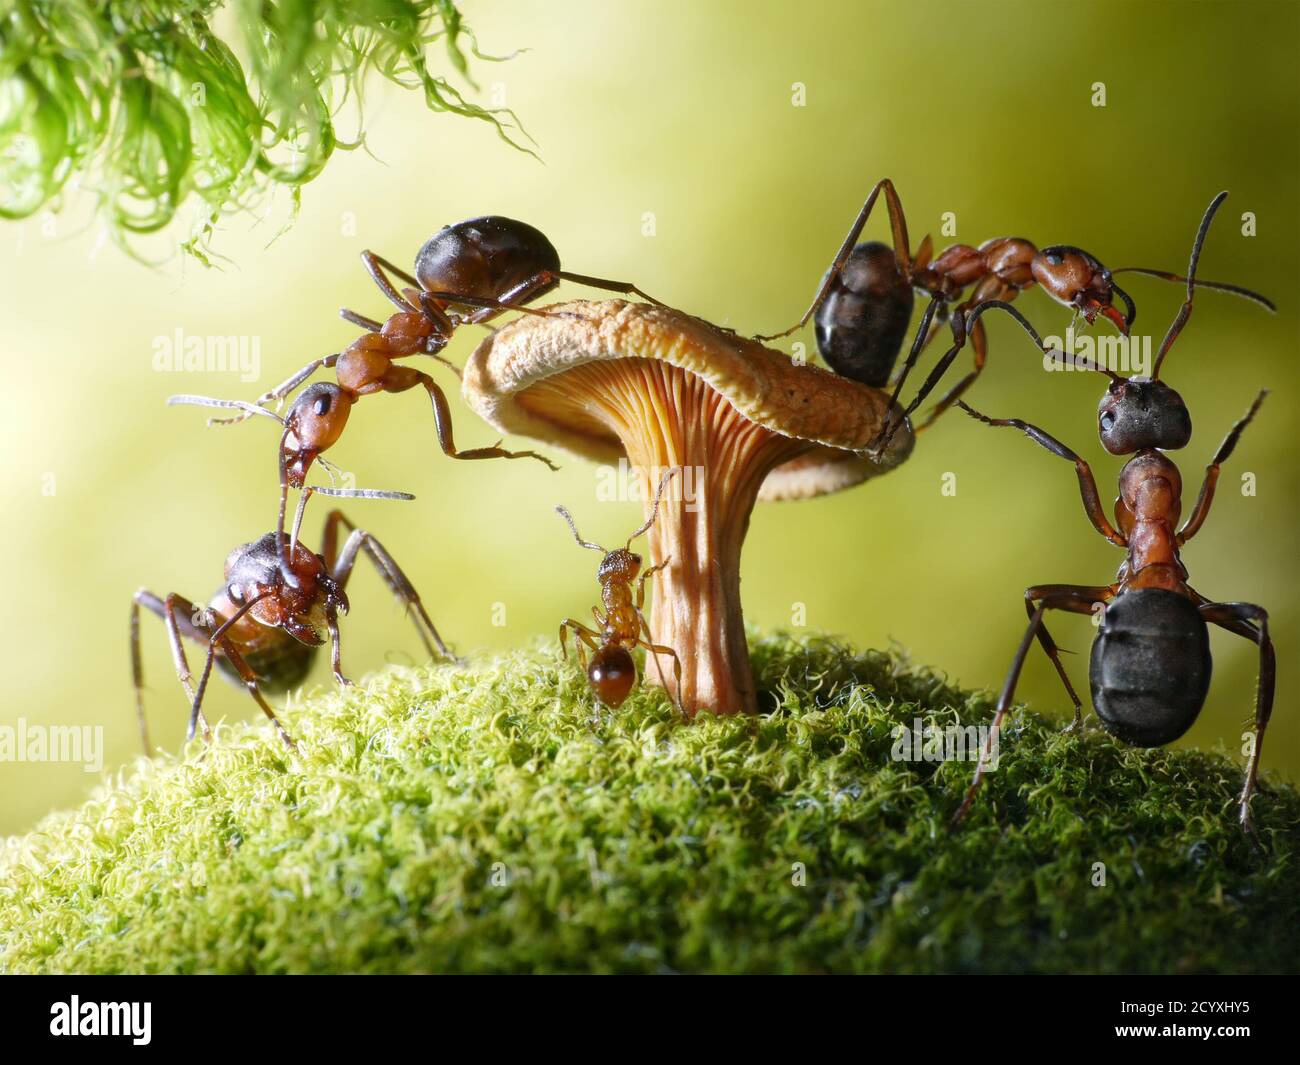 All good work is done the way ants do things: Little by little. Stock Photo